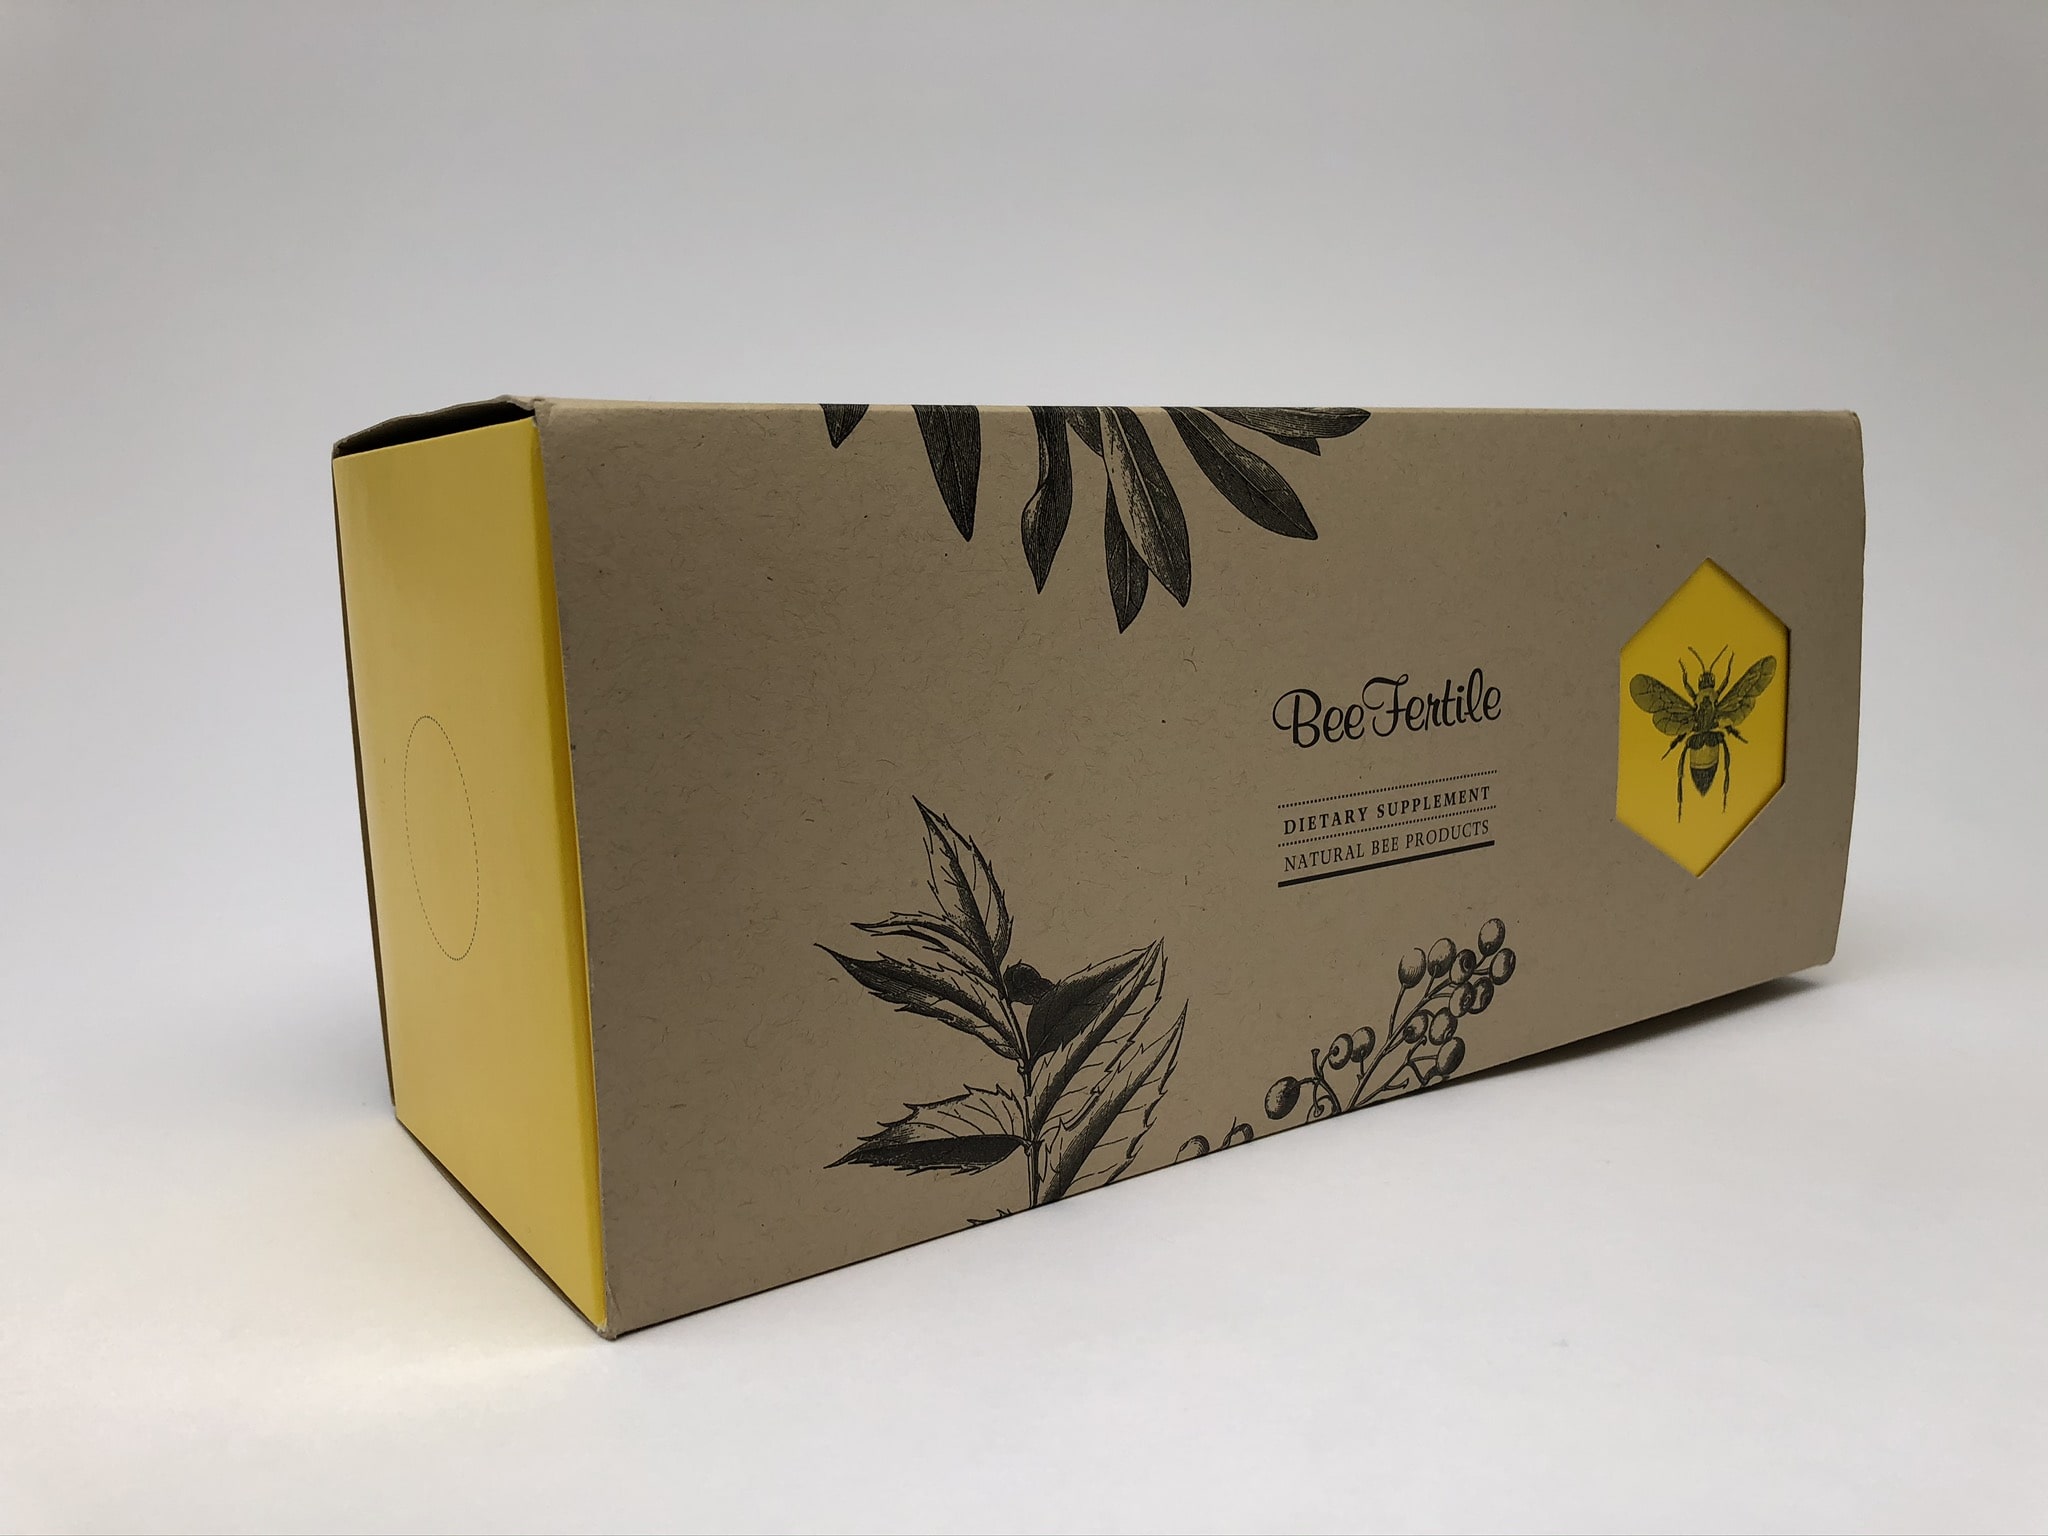 The Top 5 Packaging Design Trends to Watch for 2021